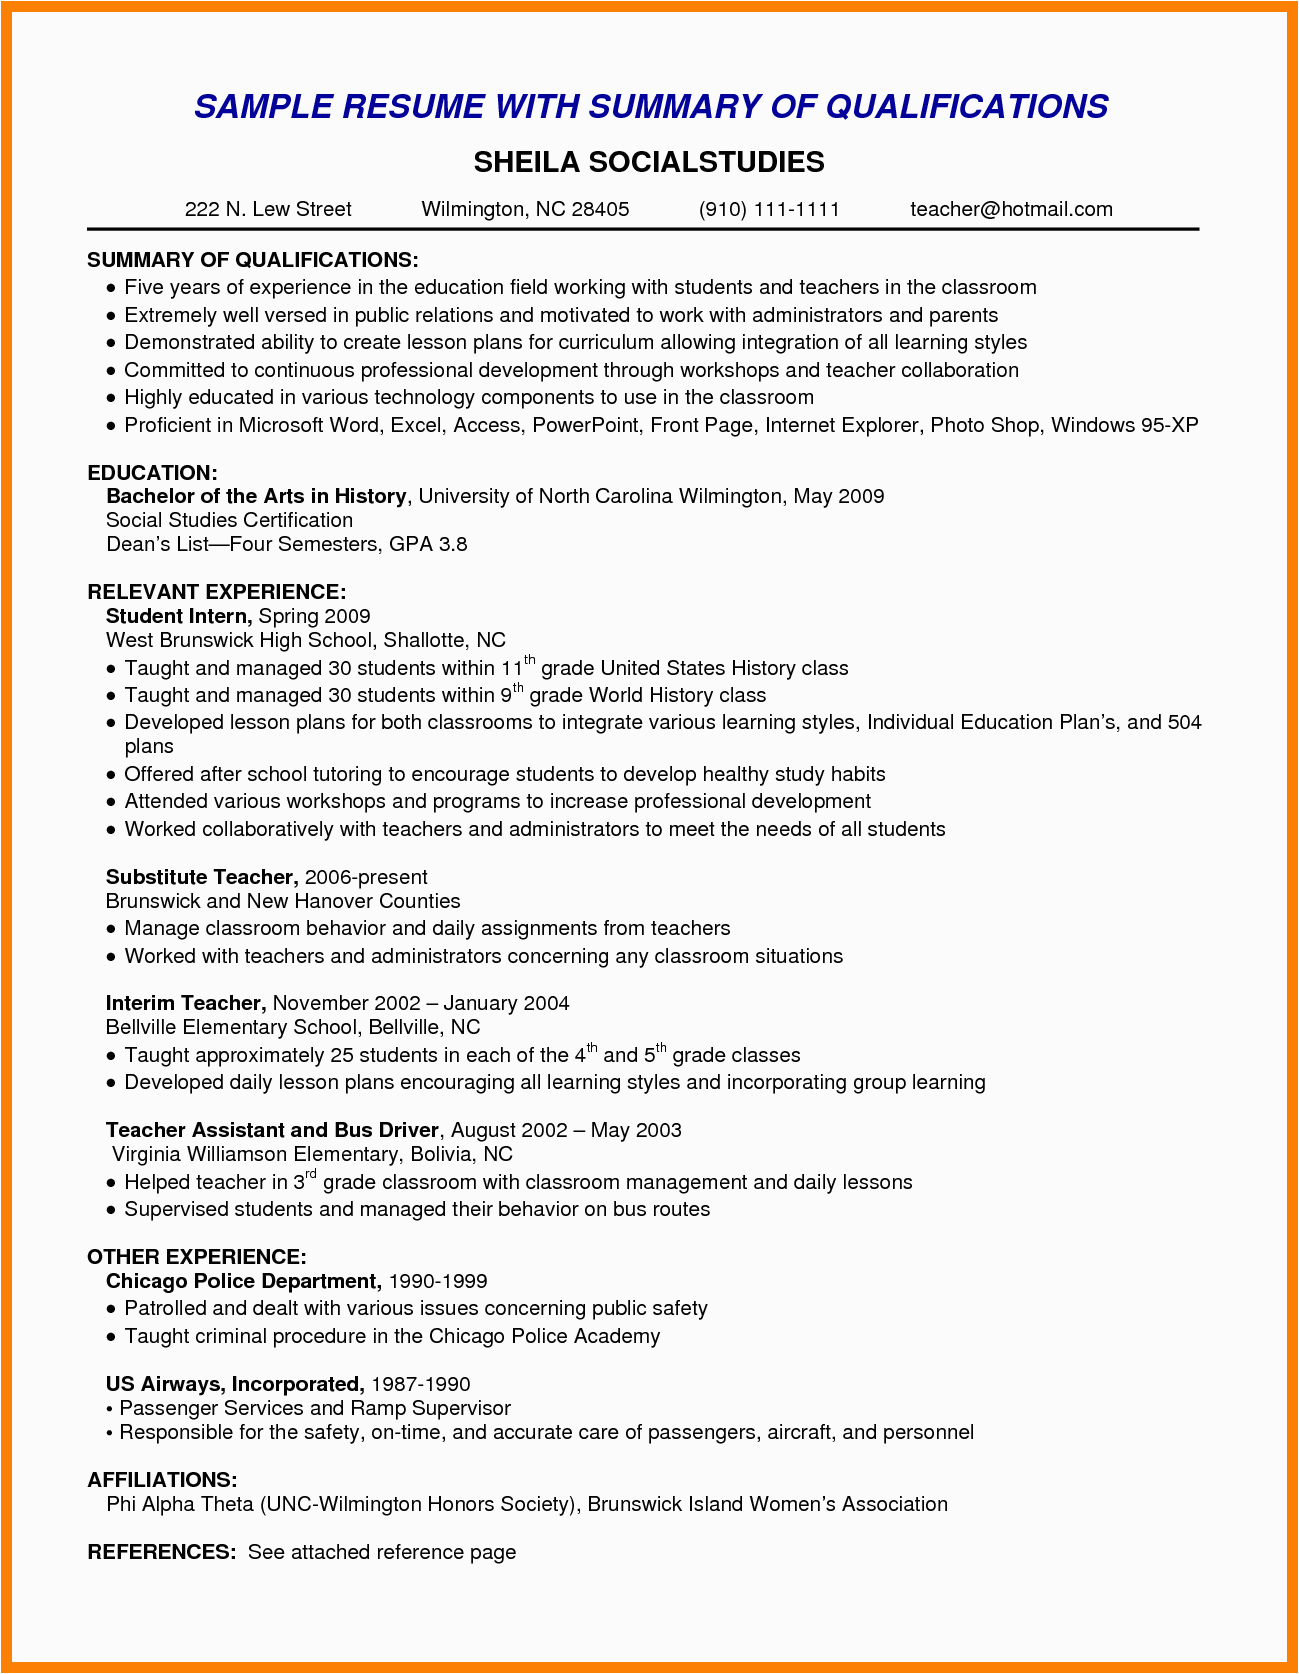 Professional Summary Resume Sample for It Resume Summary Examples